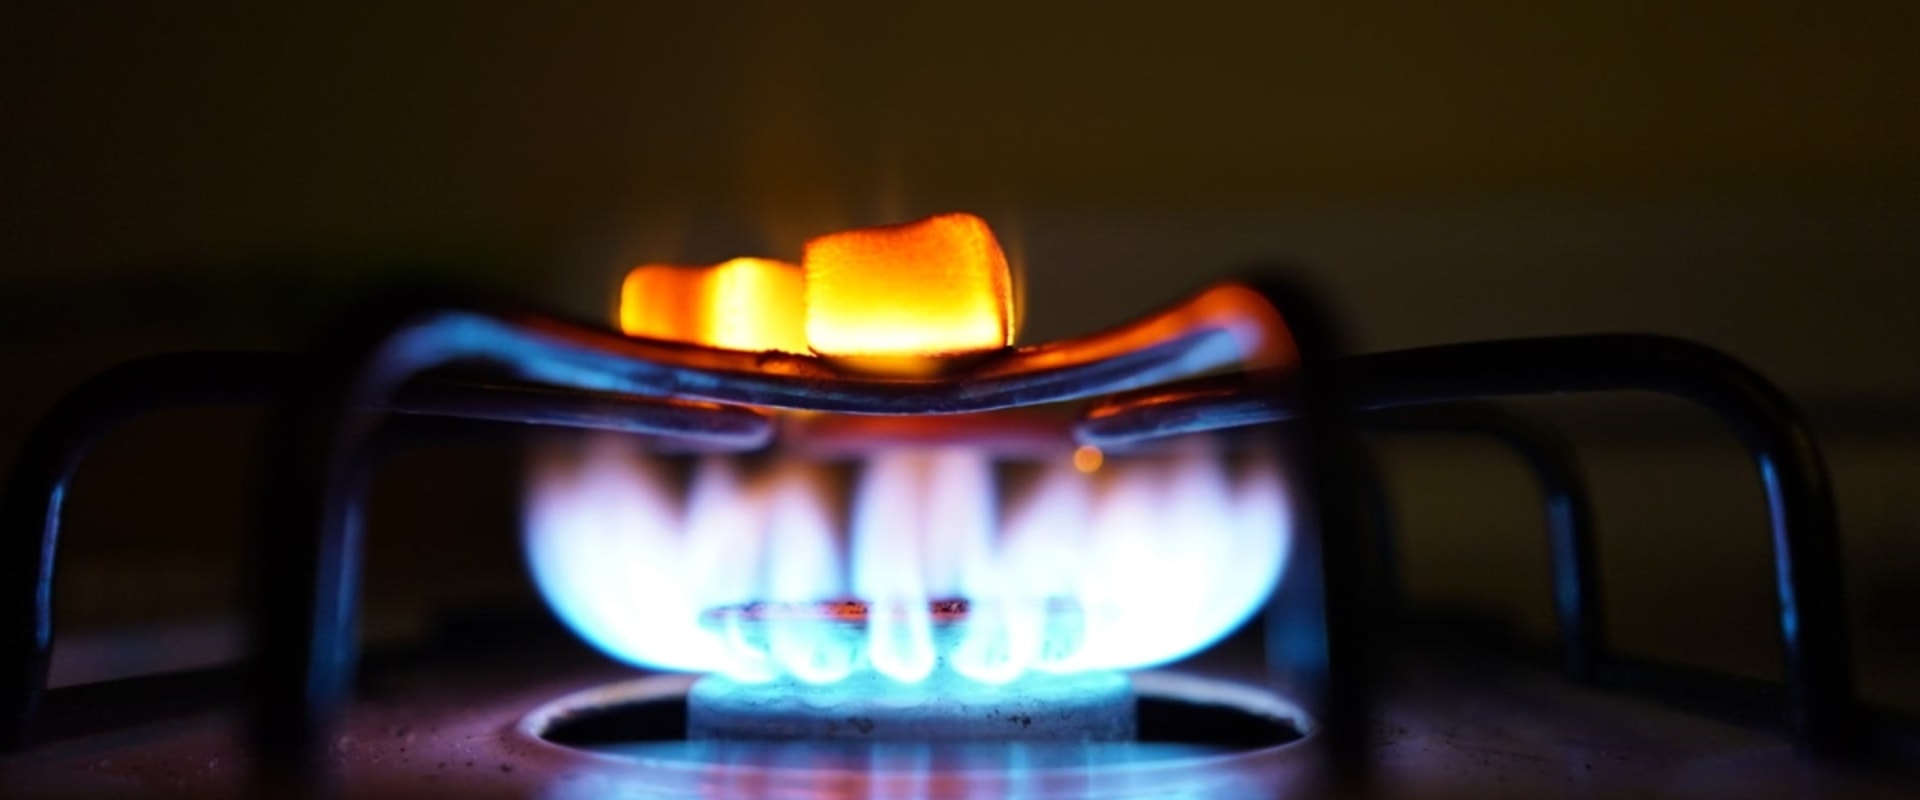 Gas Leaks: What You Need to Know